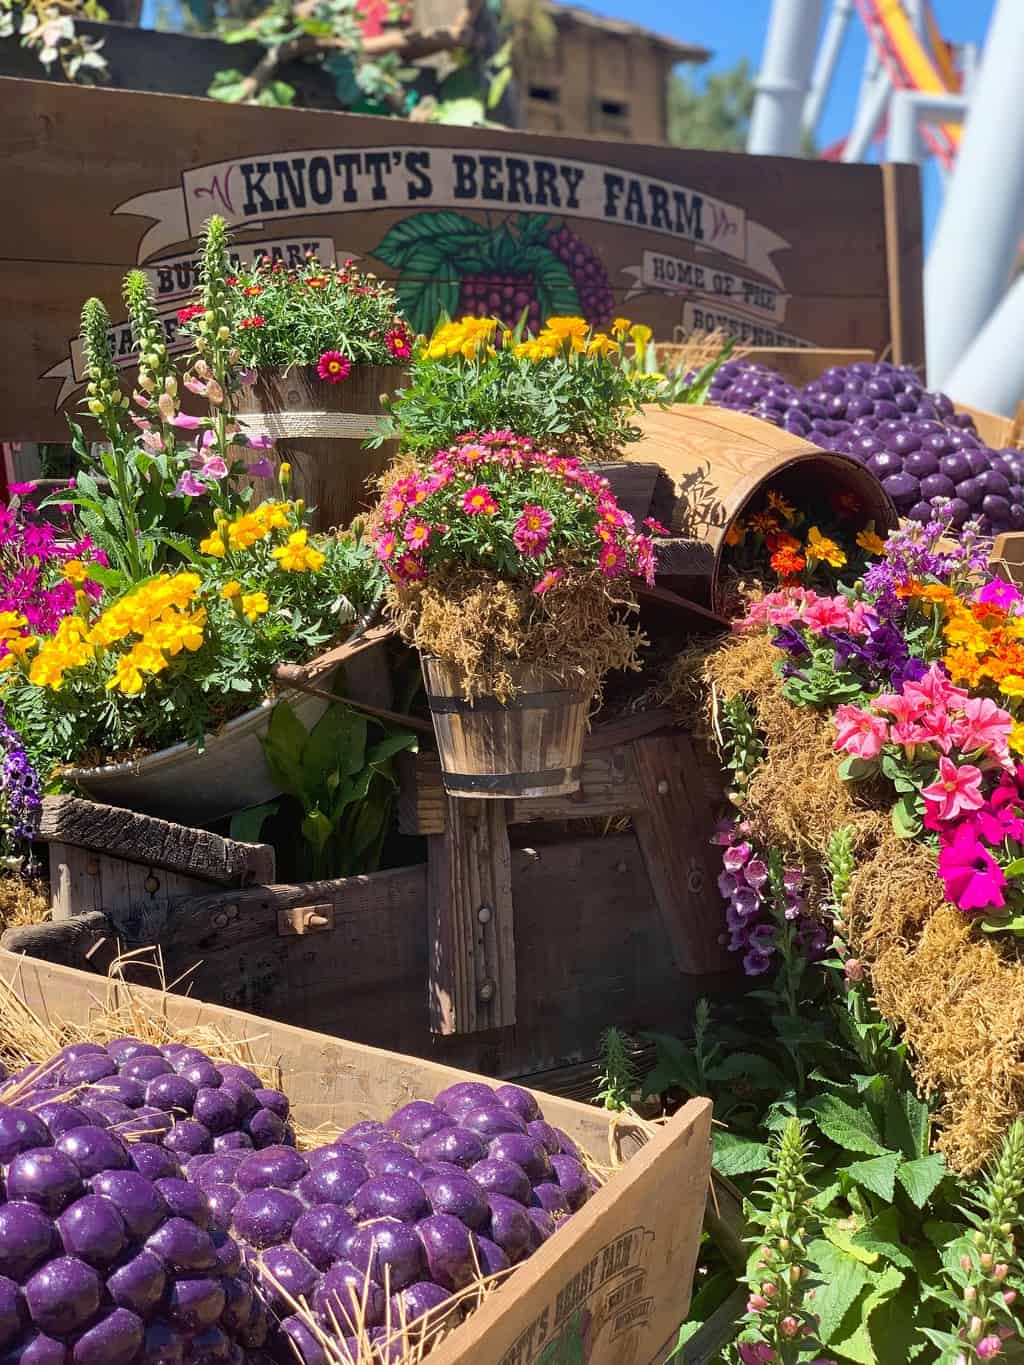 From endless boysenberry food pairings to boysenberry photo ops to a highly contentious boysenberry pie-eating contest, there is something for everyone at the Knott's Boysenberry Festival in Buena Park. 